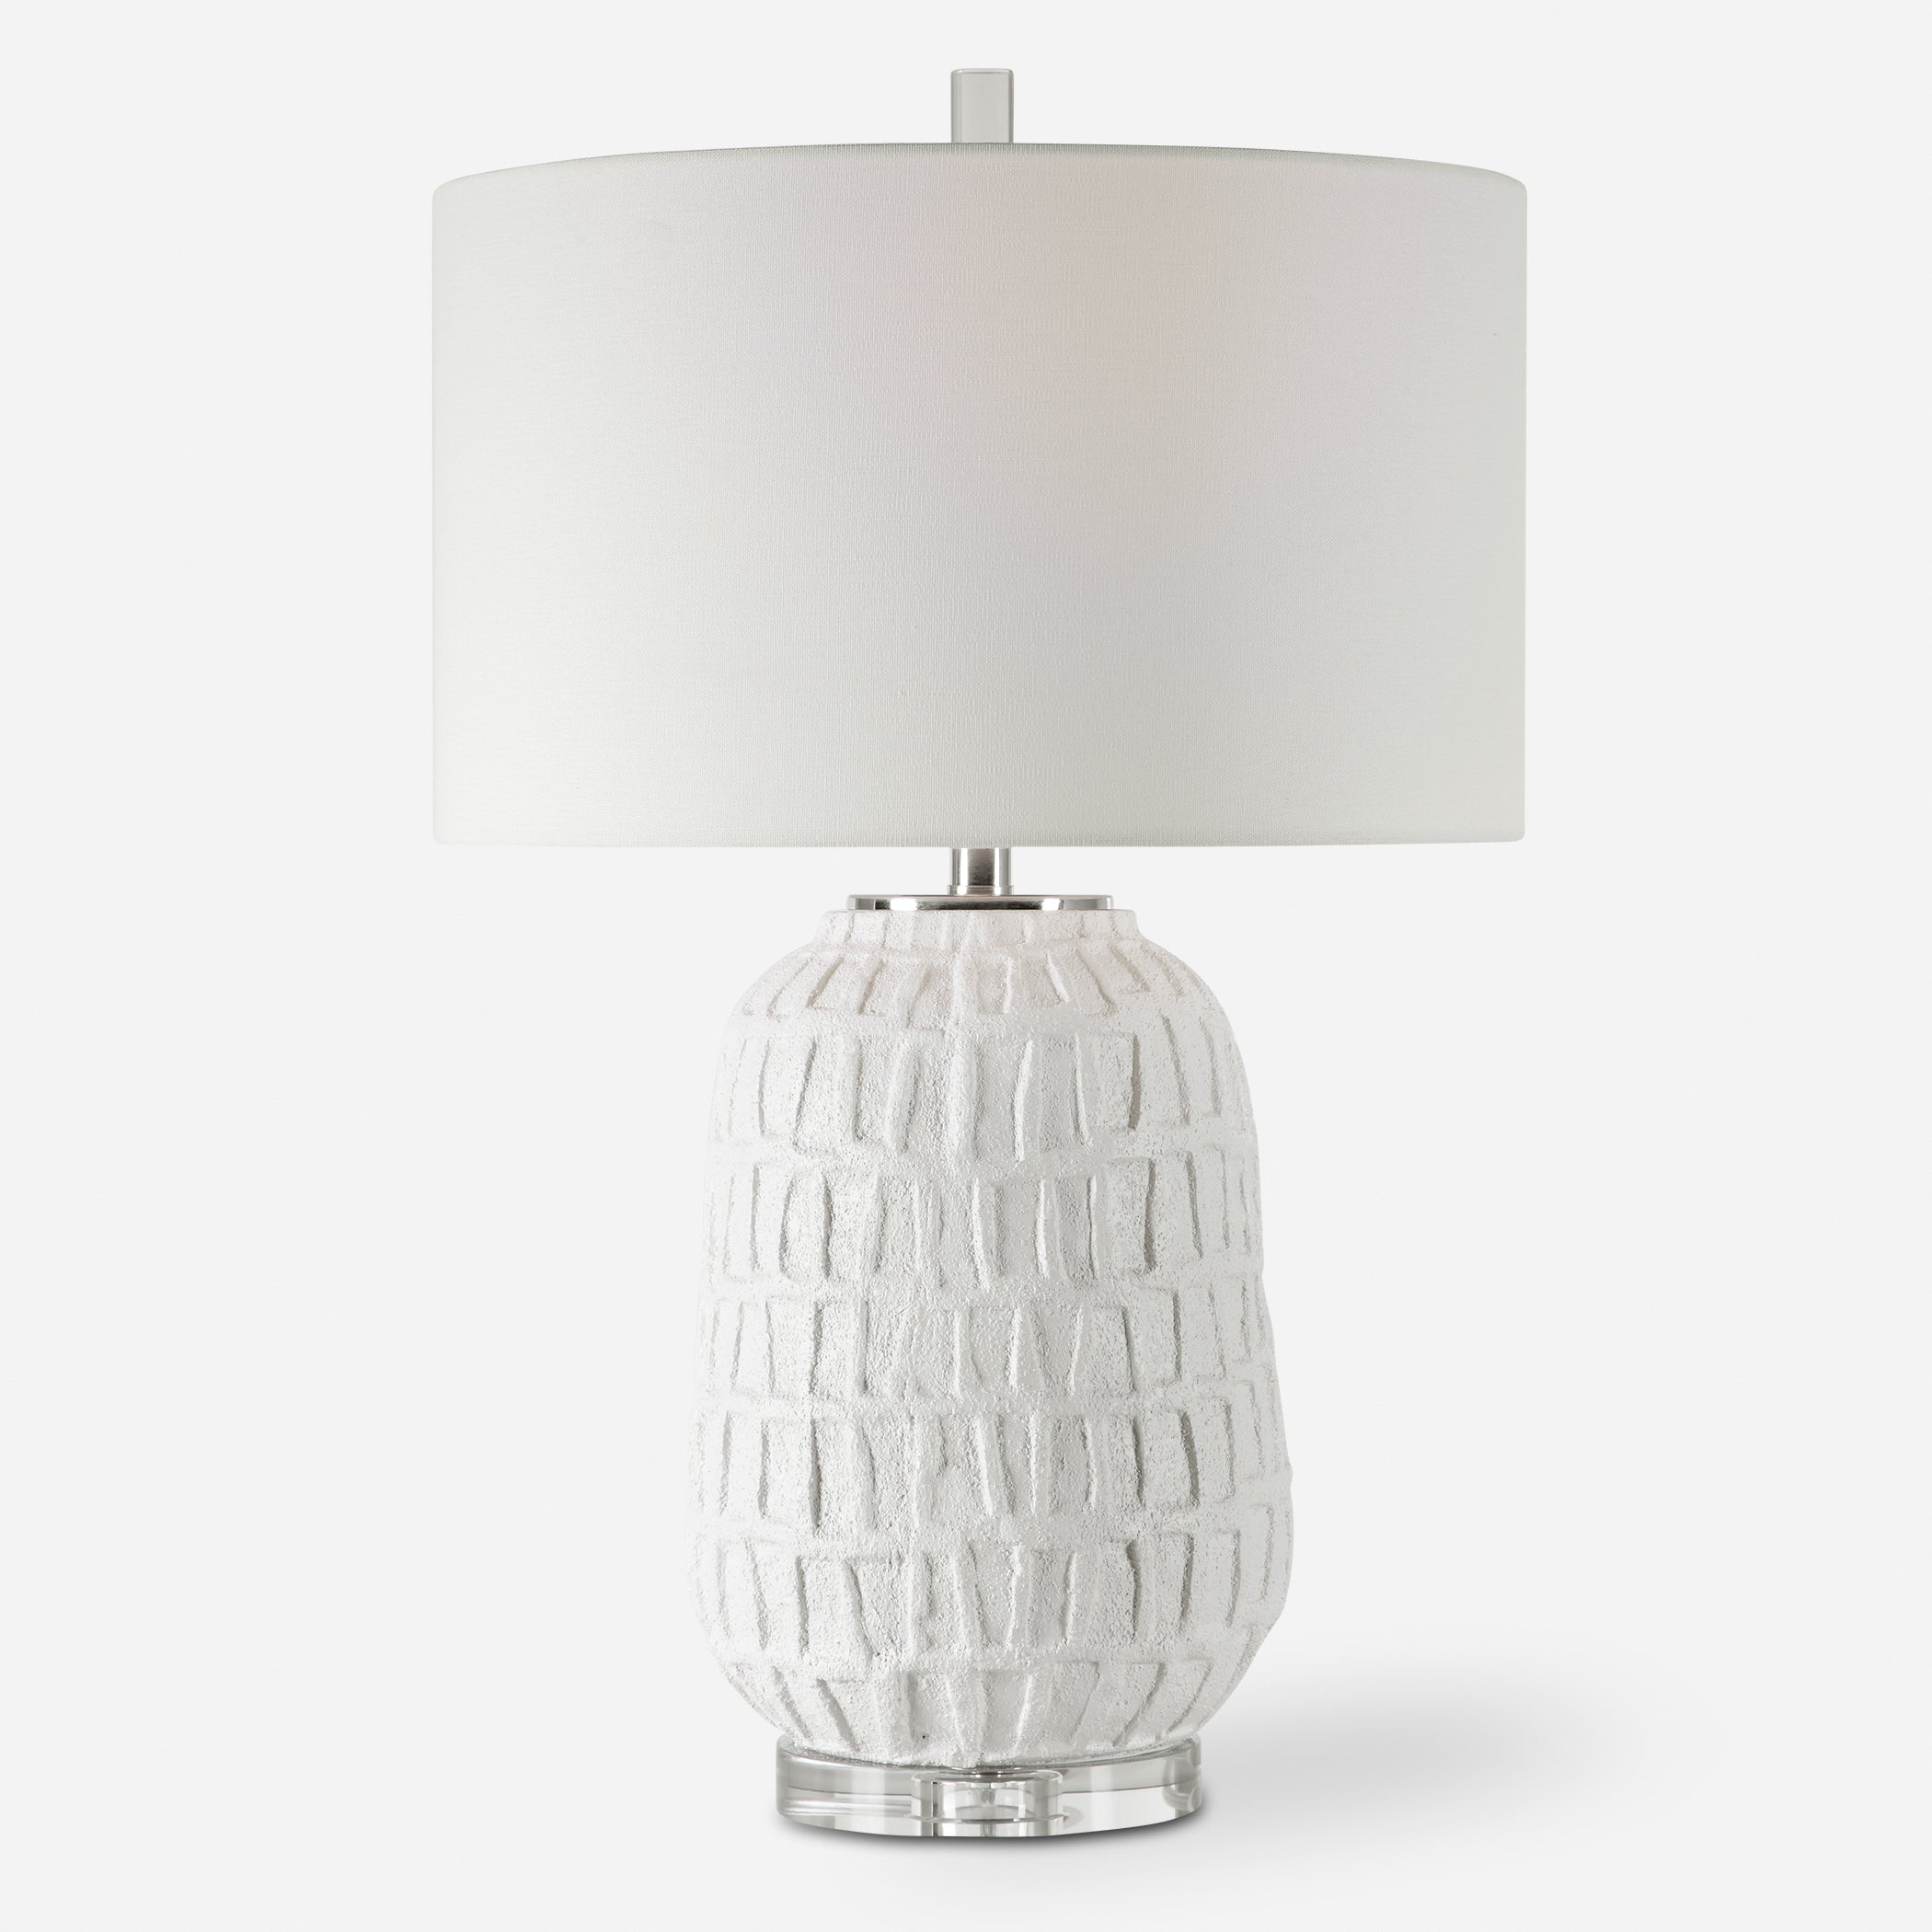 Uttermost Caelina Textured White Table Lamp Textured White Table Lamp Uttermost   